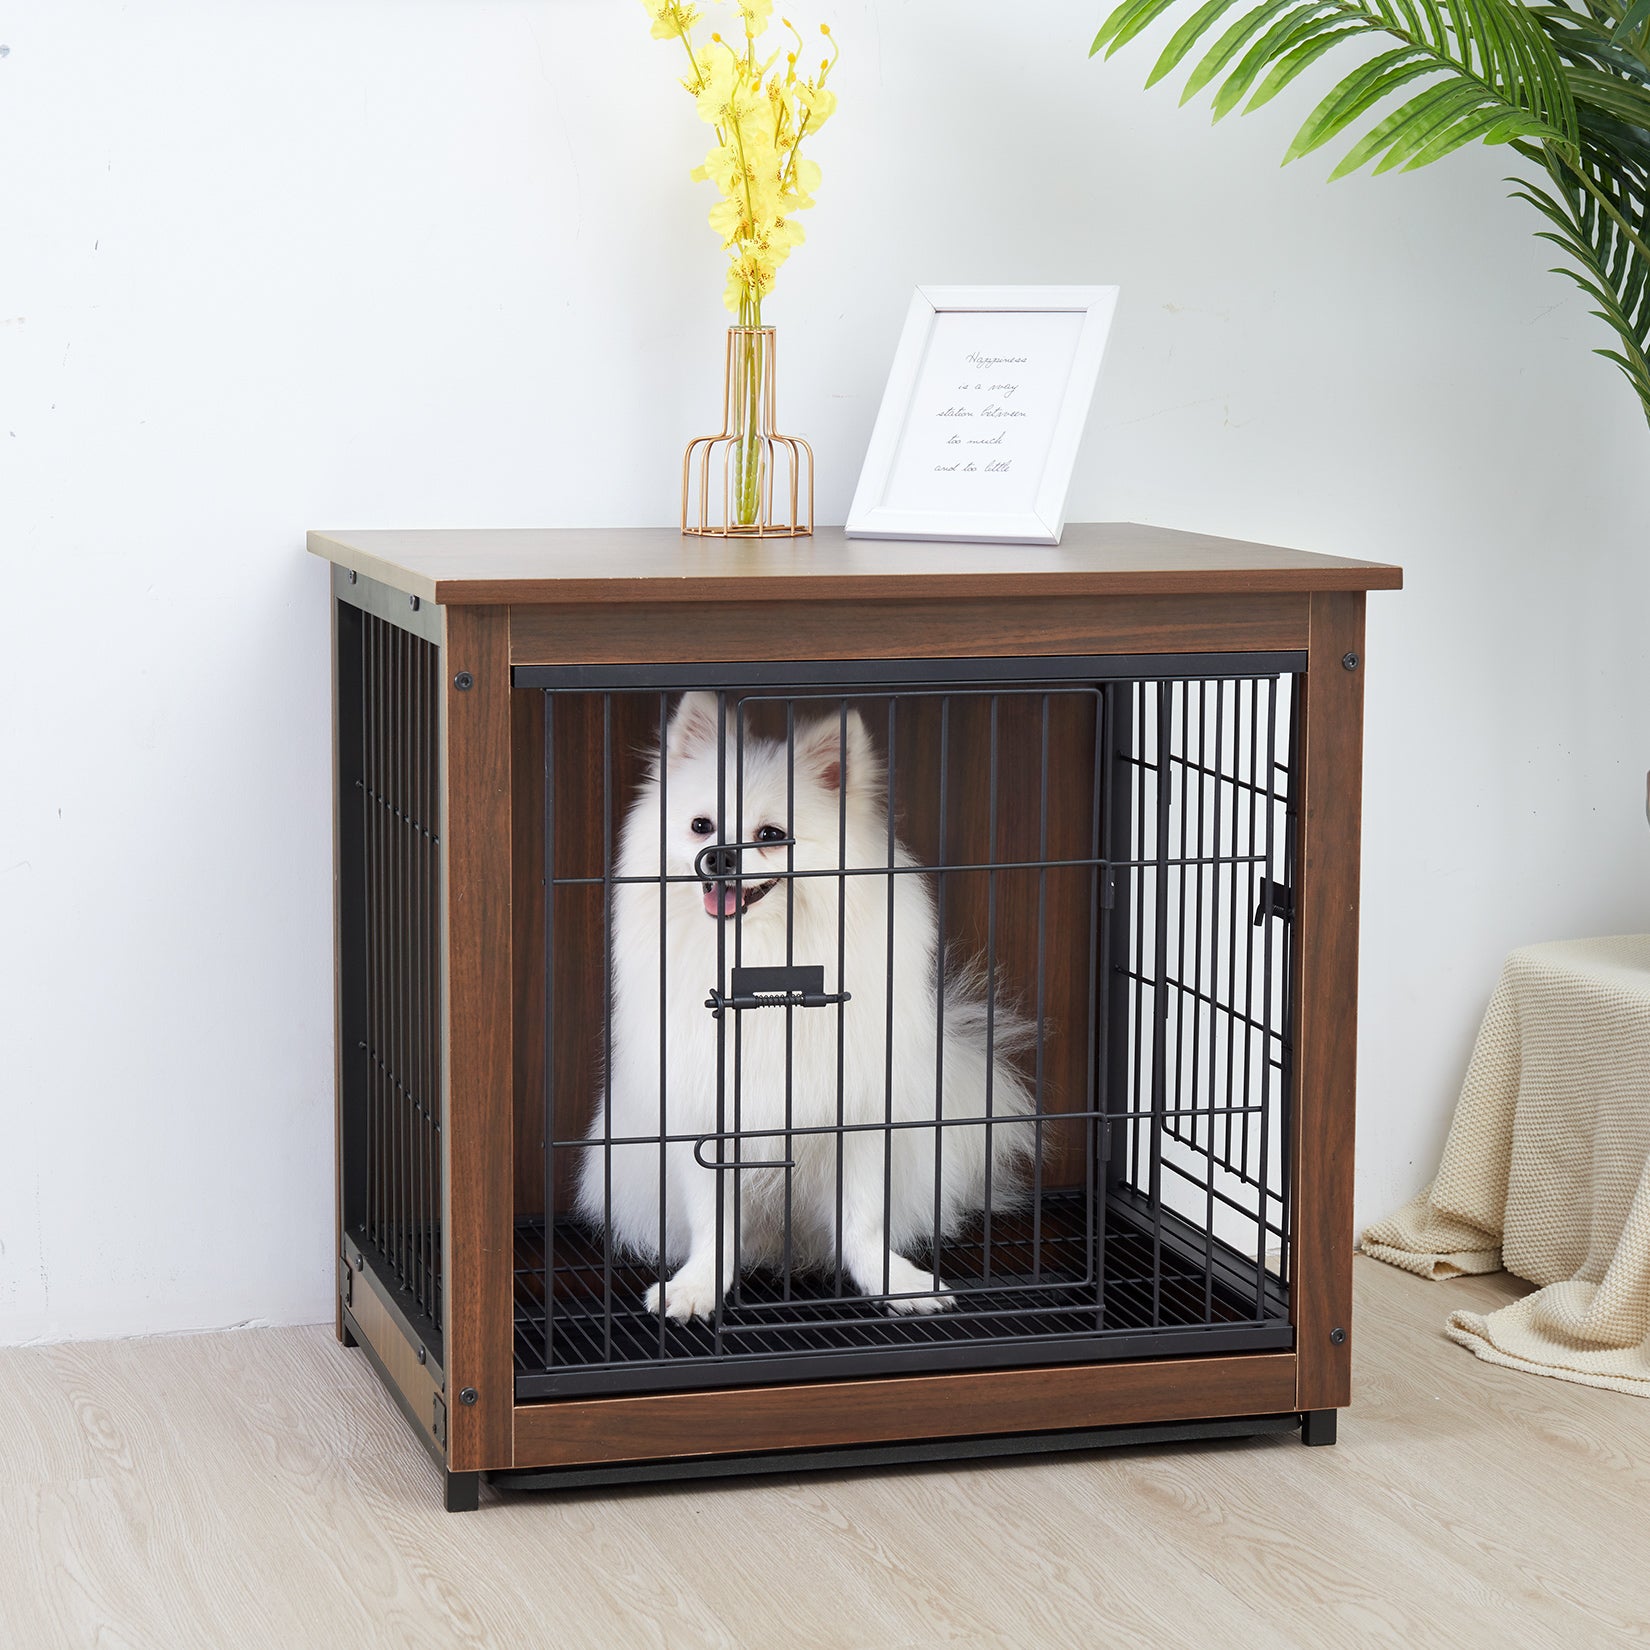 The dog cage is made of wood and metal with a nice-looking walnut color finish. Application in all kinds of interiors. Dual doors for multiple entry options, latch mechanism keep your dogs secure. It also features a removable tray to make cleaning up accidents or spills easy.